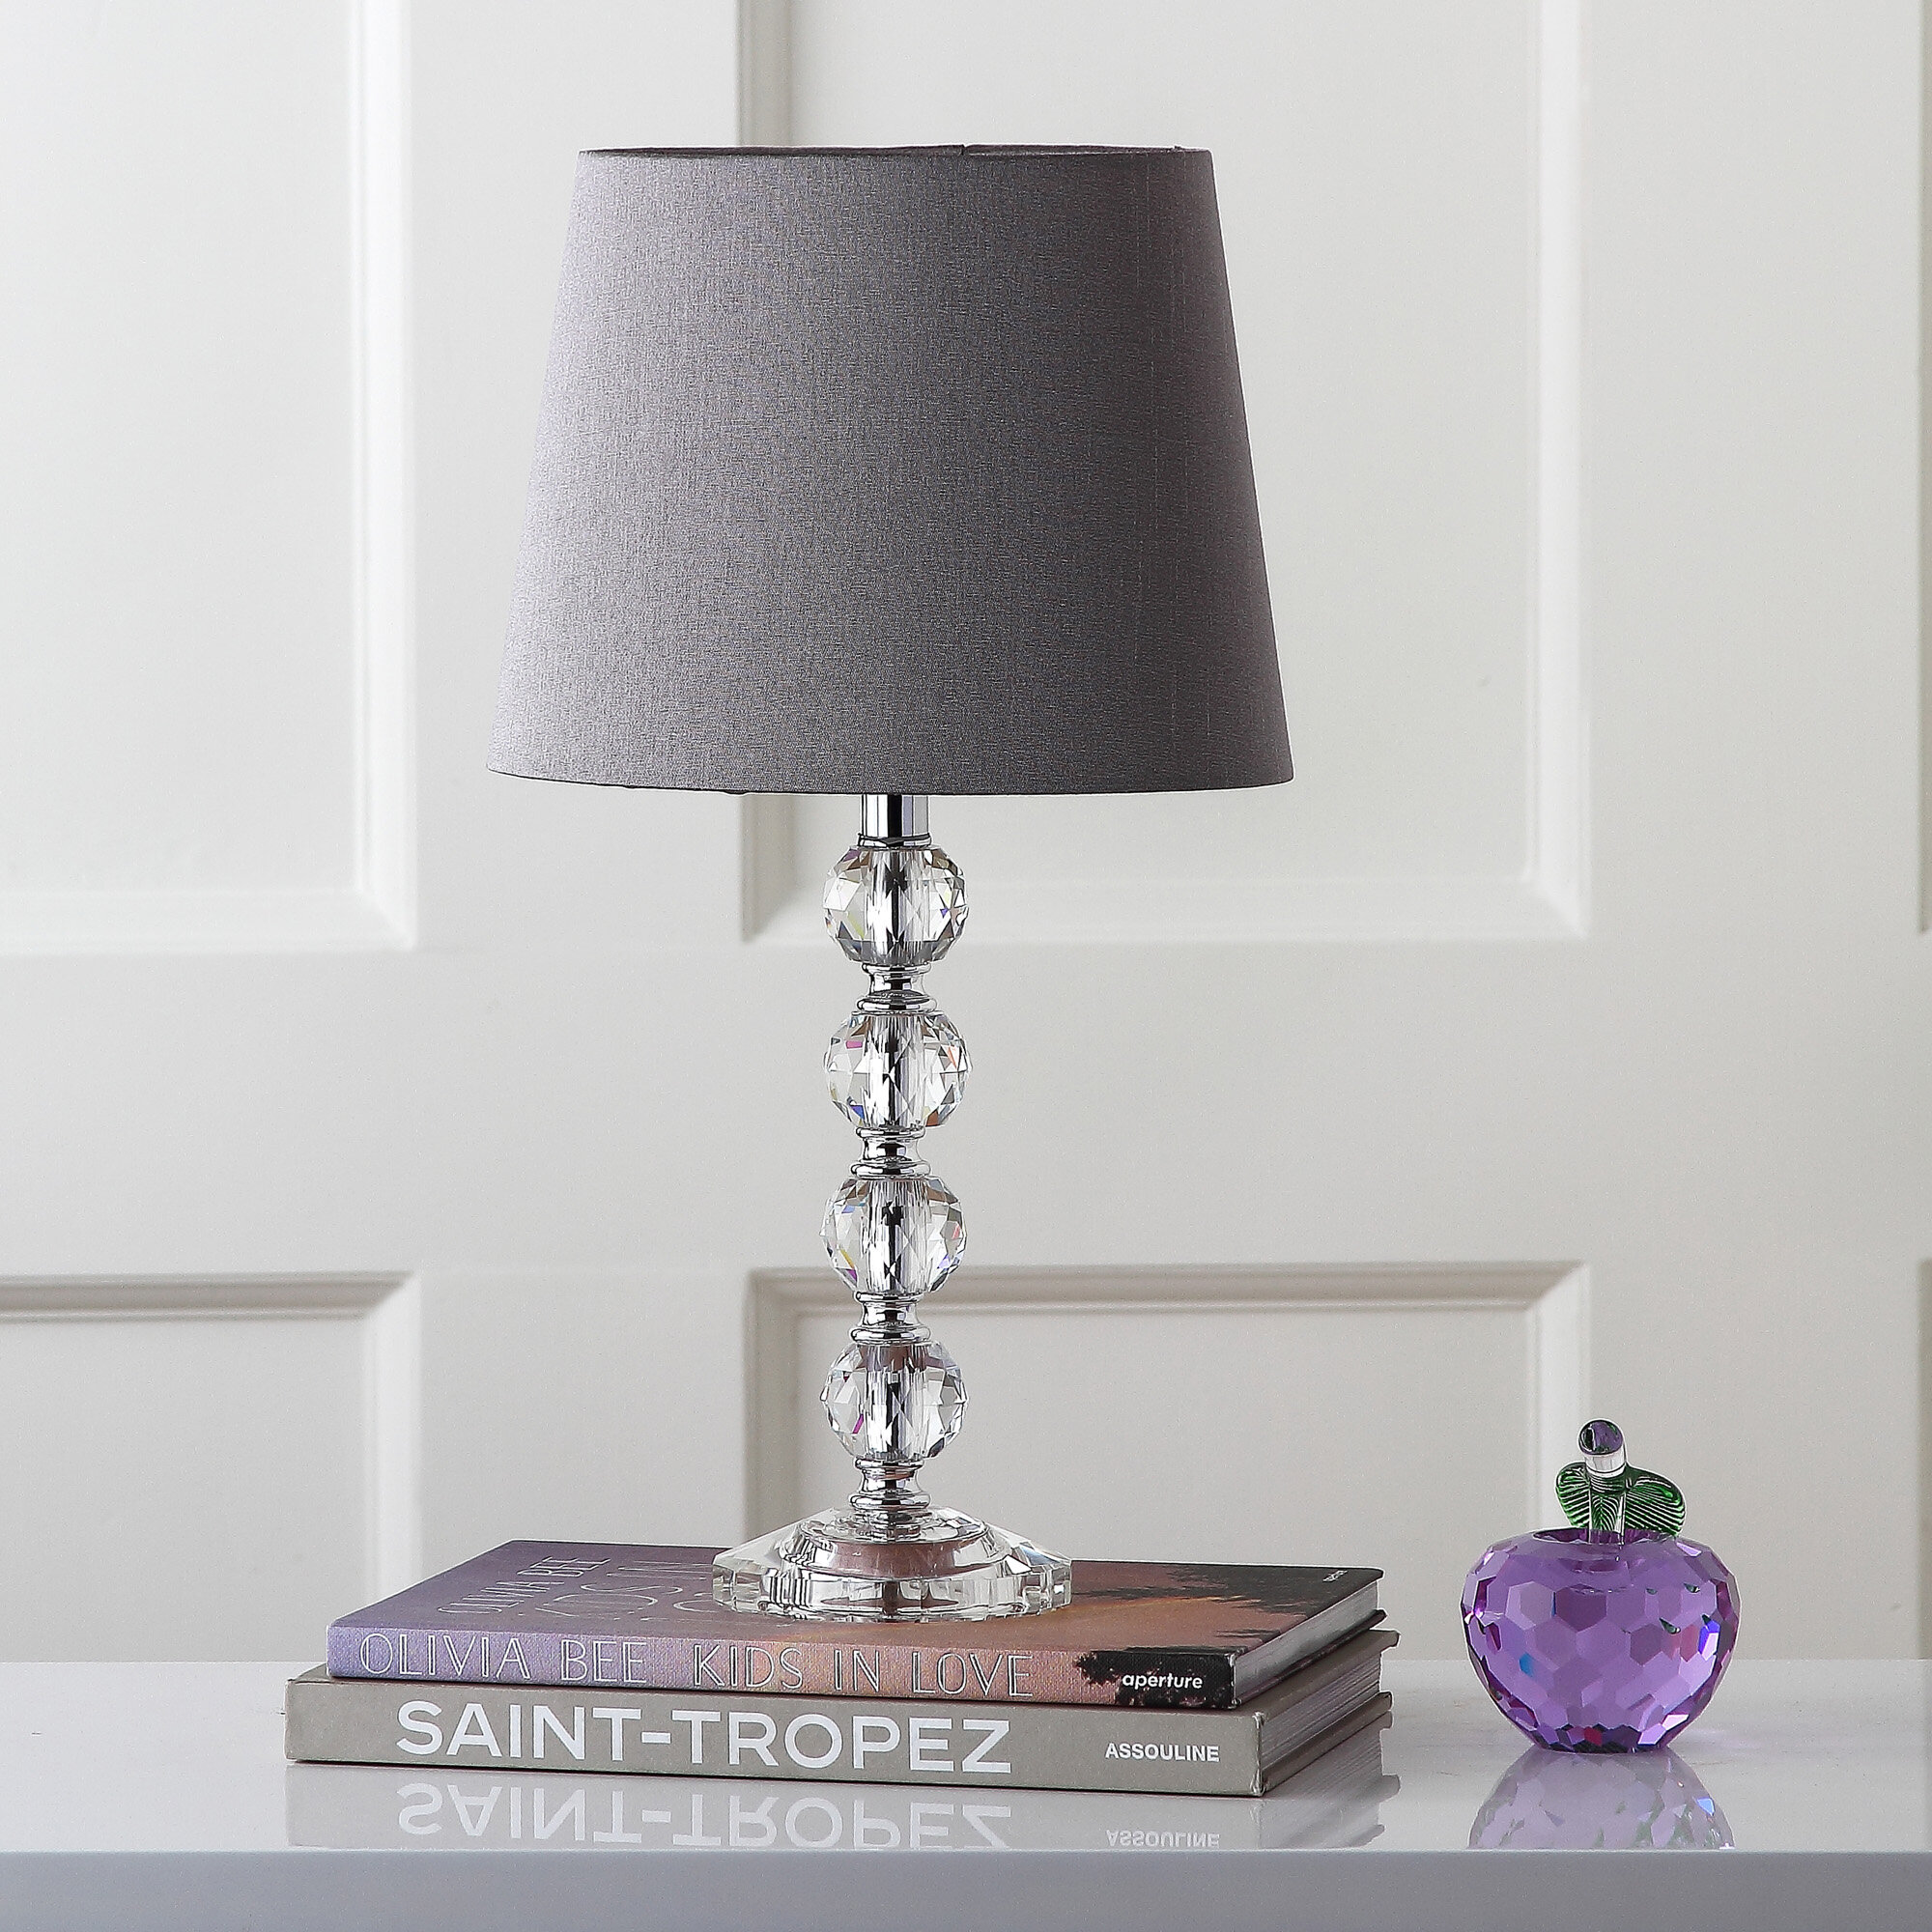 Wayfair | Gray Shade On & Off Switch Table Lamps You'll Love in 2022